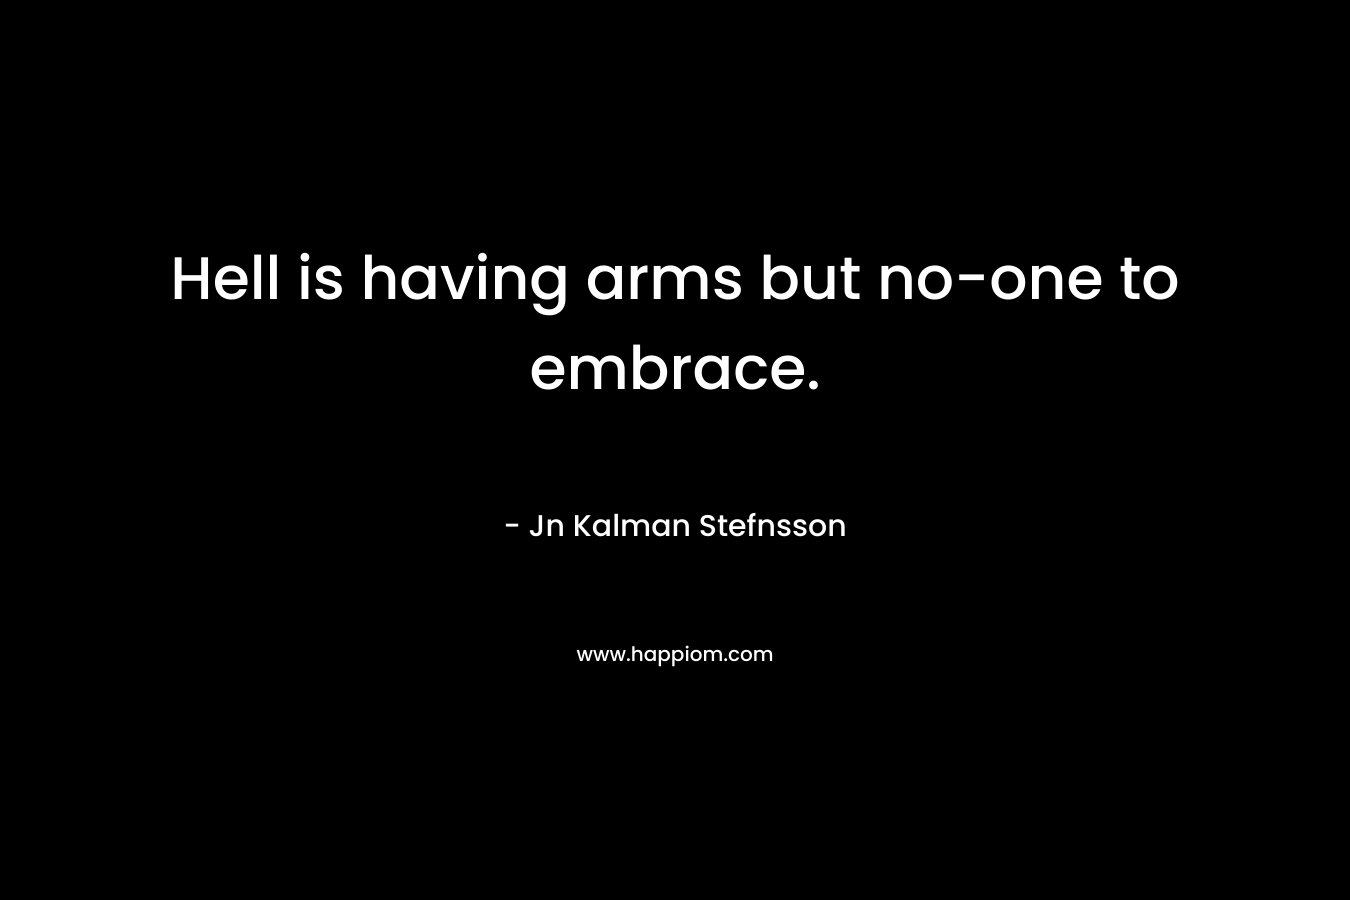 Hell is having arms but no-one to embrace. – Jn Kalman Stefnsson